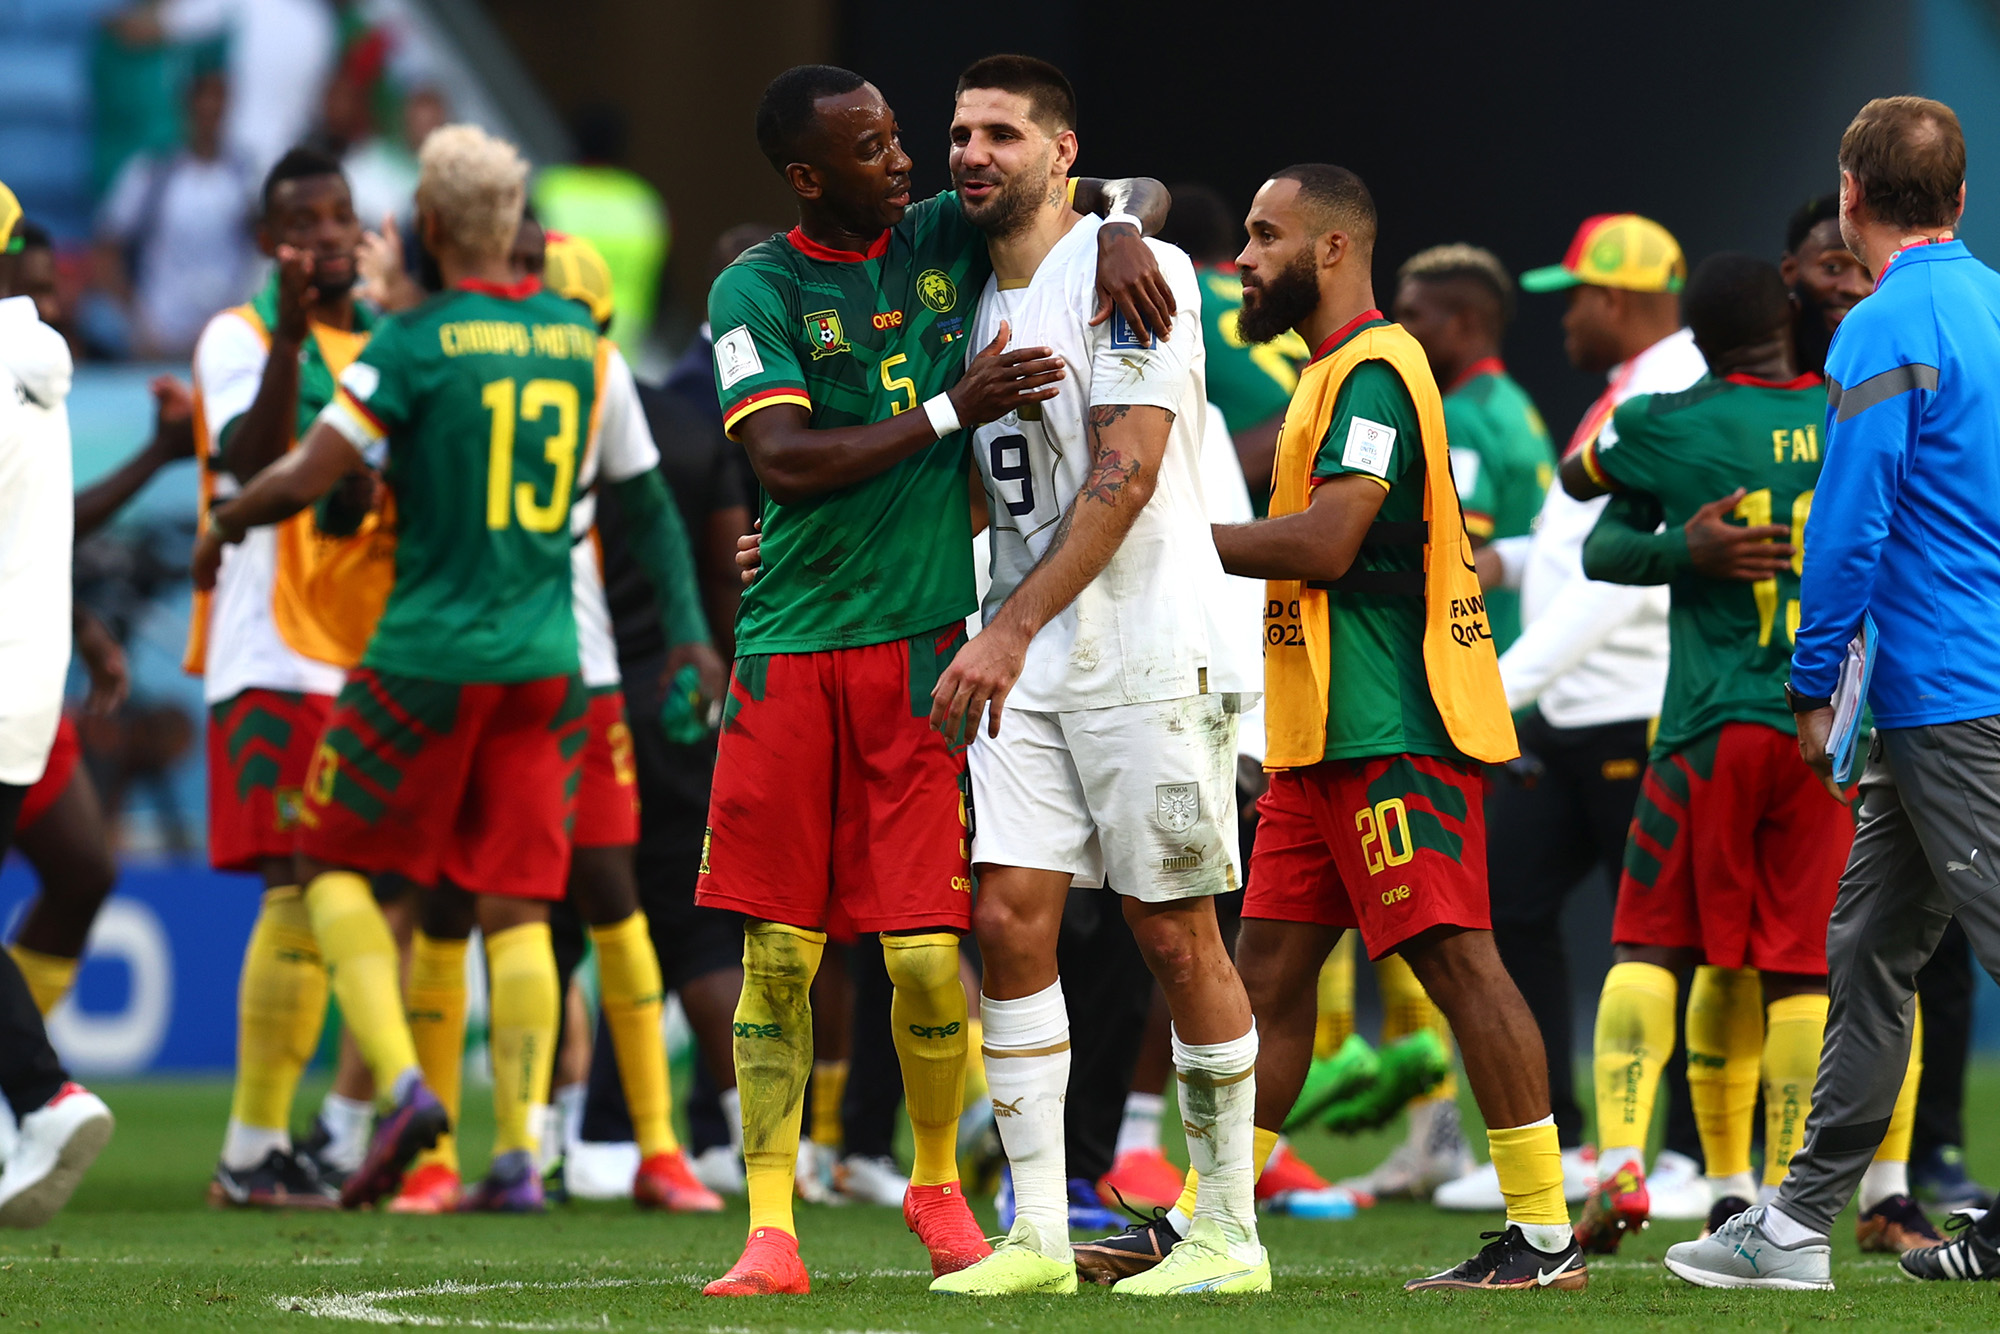 Serbia's Aleksandar Mitrovic hugging Cameroon's Gael Ondoua at the end of a World Cup classic.